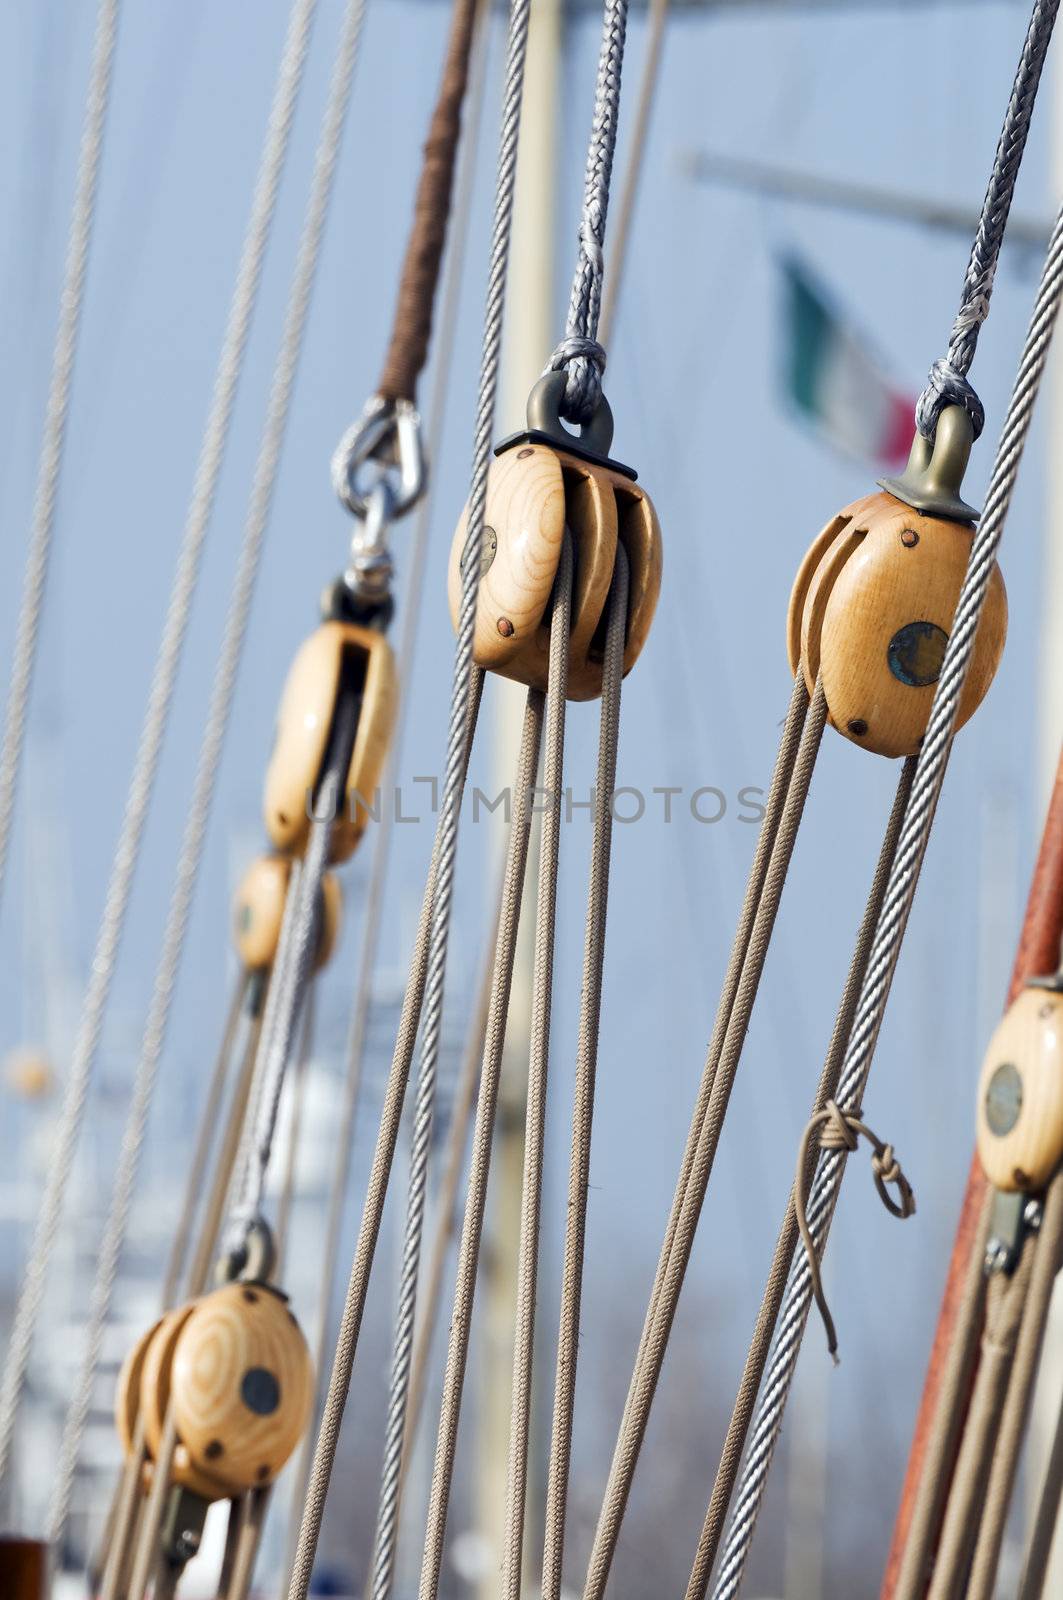 Wooden blocks on an old sail boat